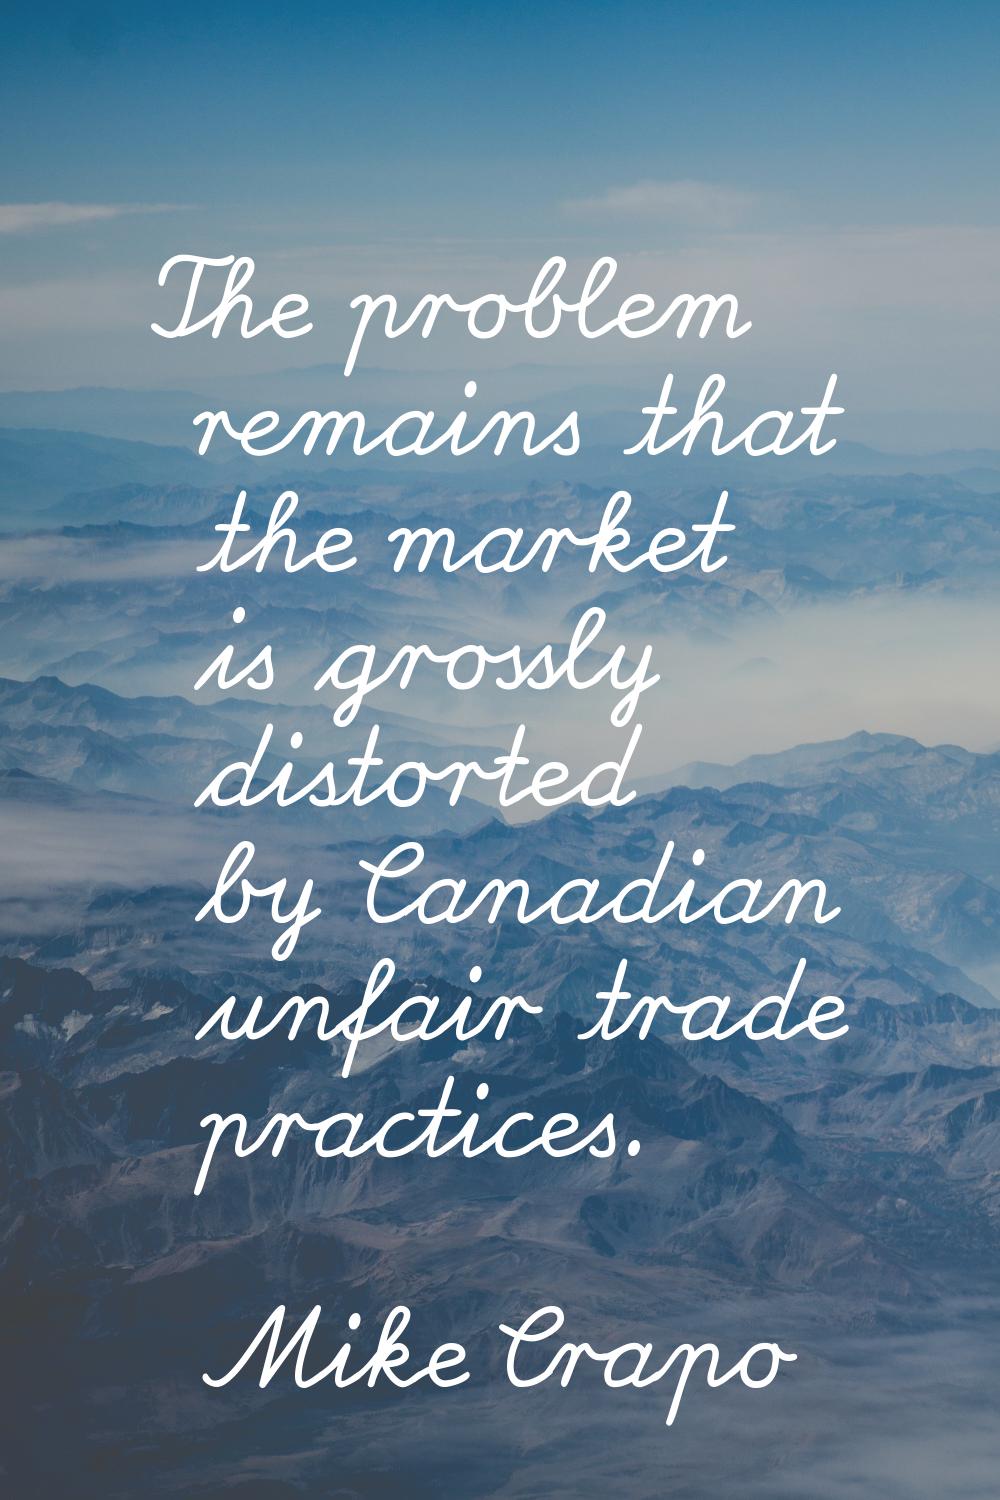 The problem remains that the market is grossly distorted by Canadian unfair trade practices.